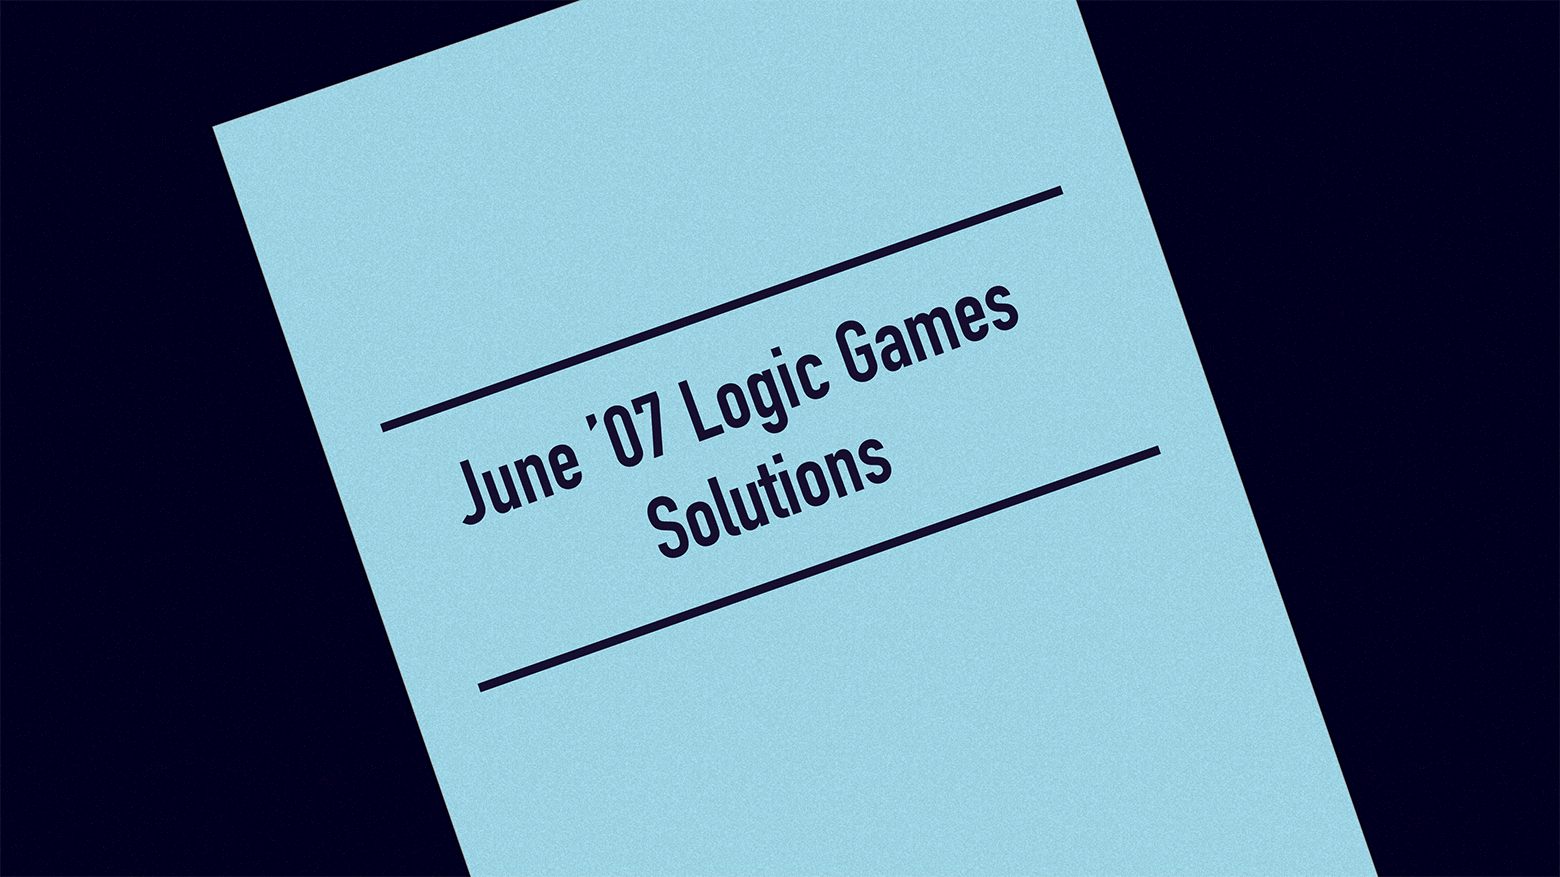 Four sample Logic Games from the June ’07 LSAT, with full solutions